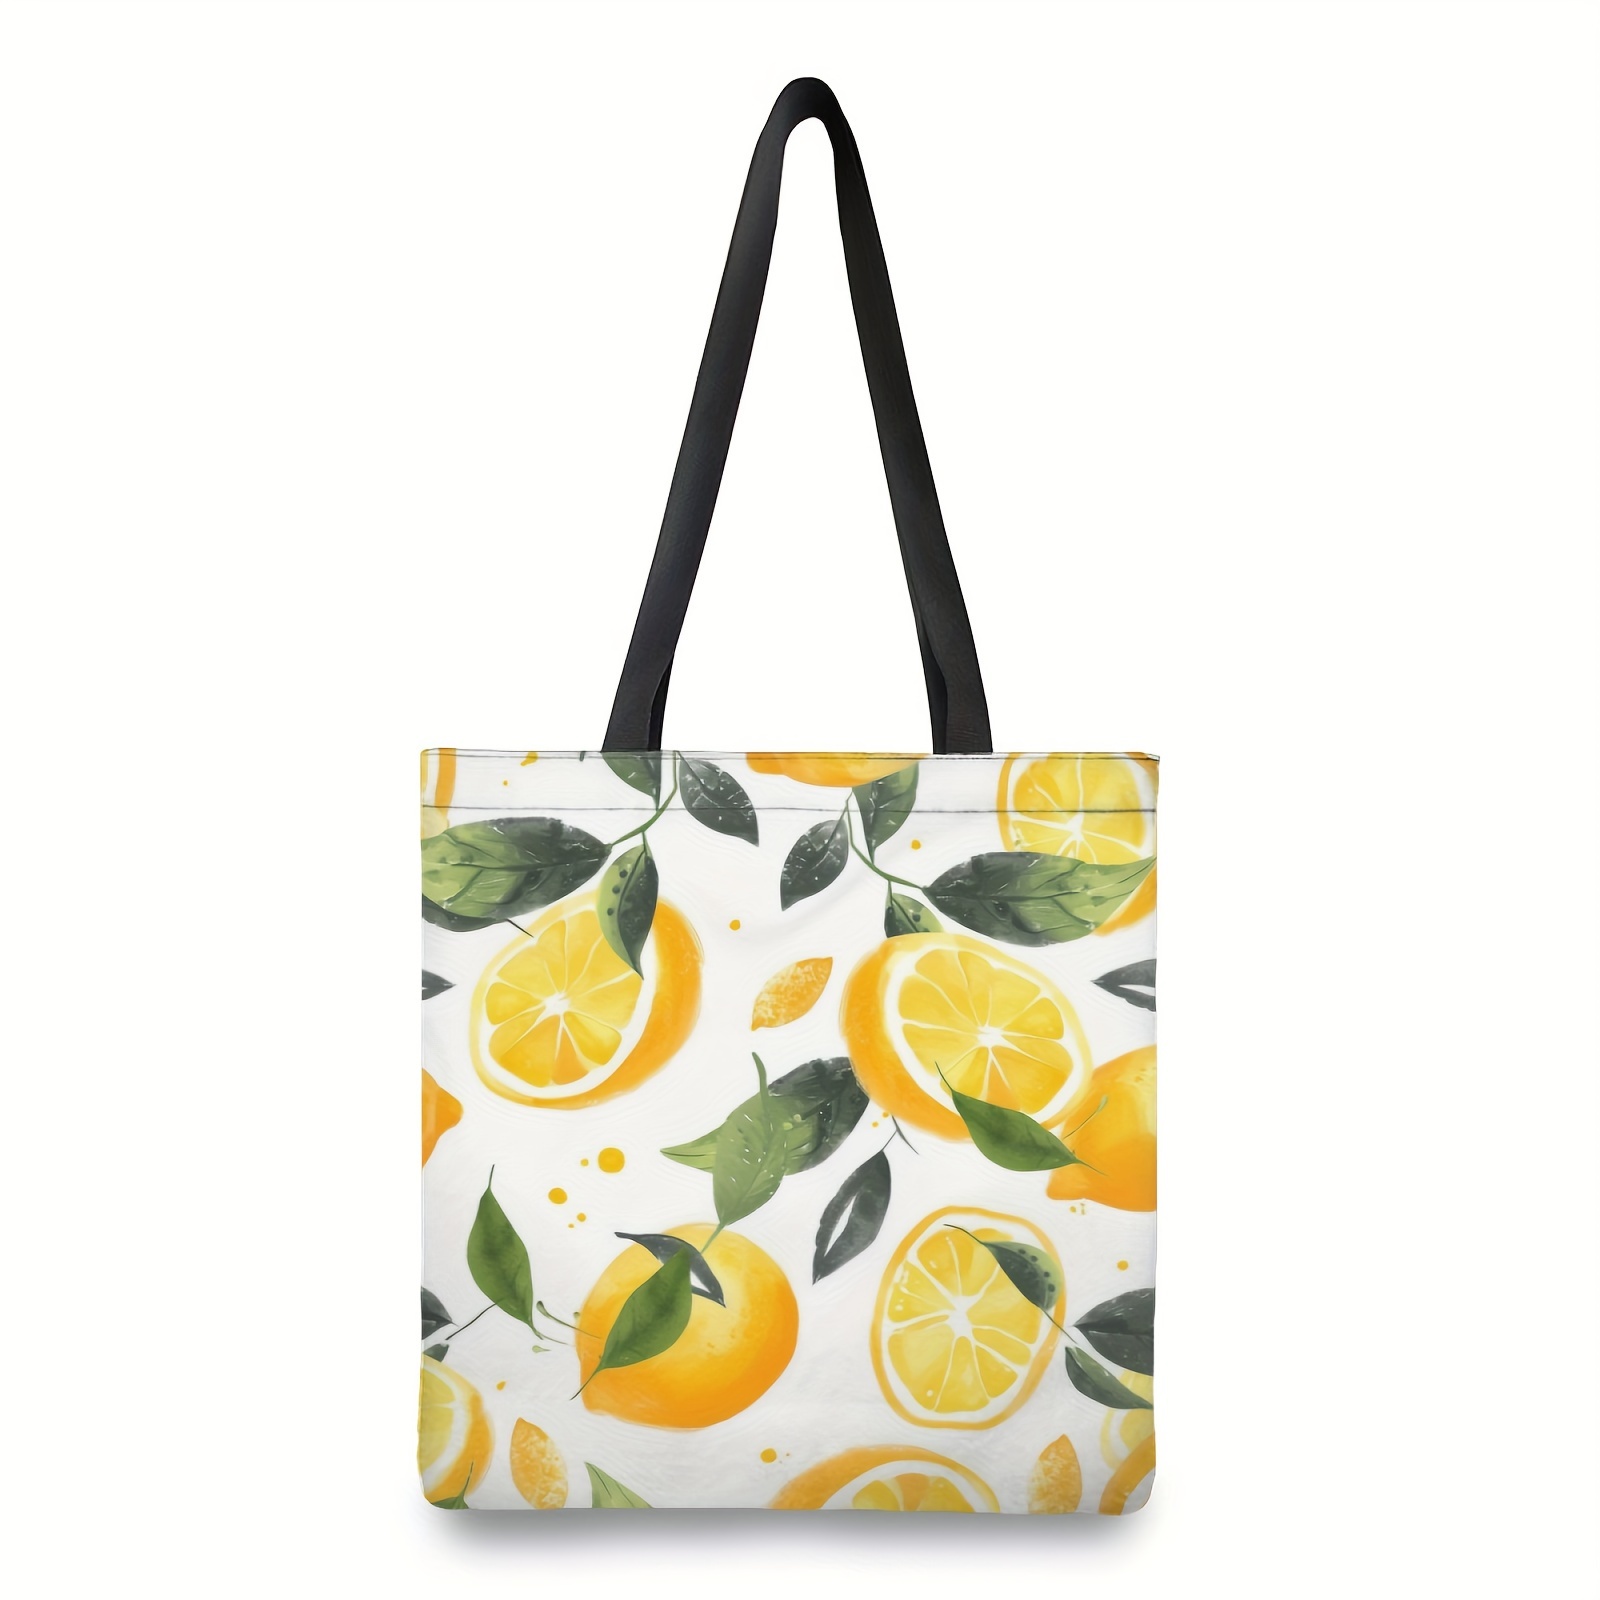 

1pc, White And Yellow Background With Lemons And Leaves Canvas Tote Bag Large Women Casual Shoulder Bag Handbag Reusable Multipurpose Shopping Grocery Bag For Outdoors